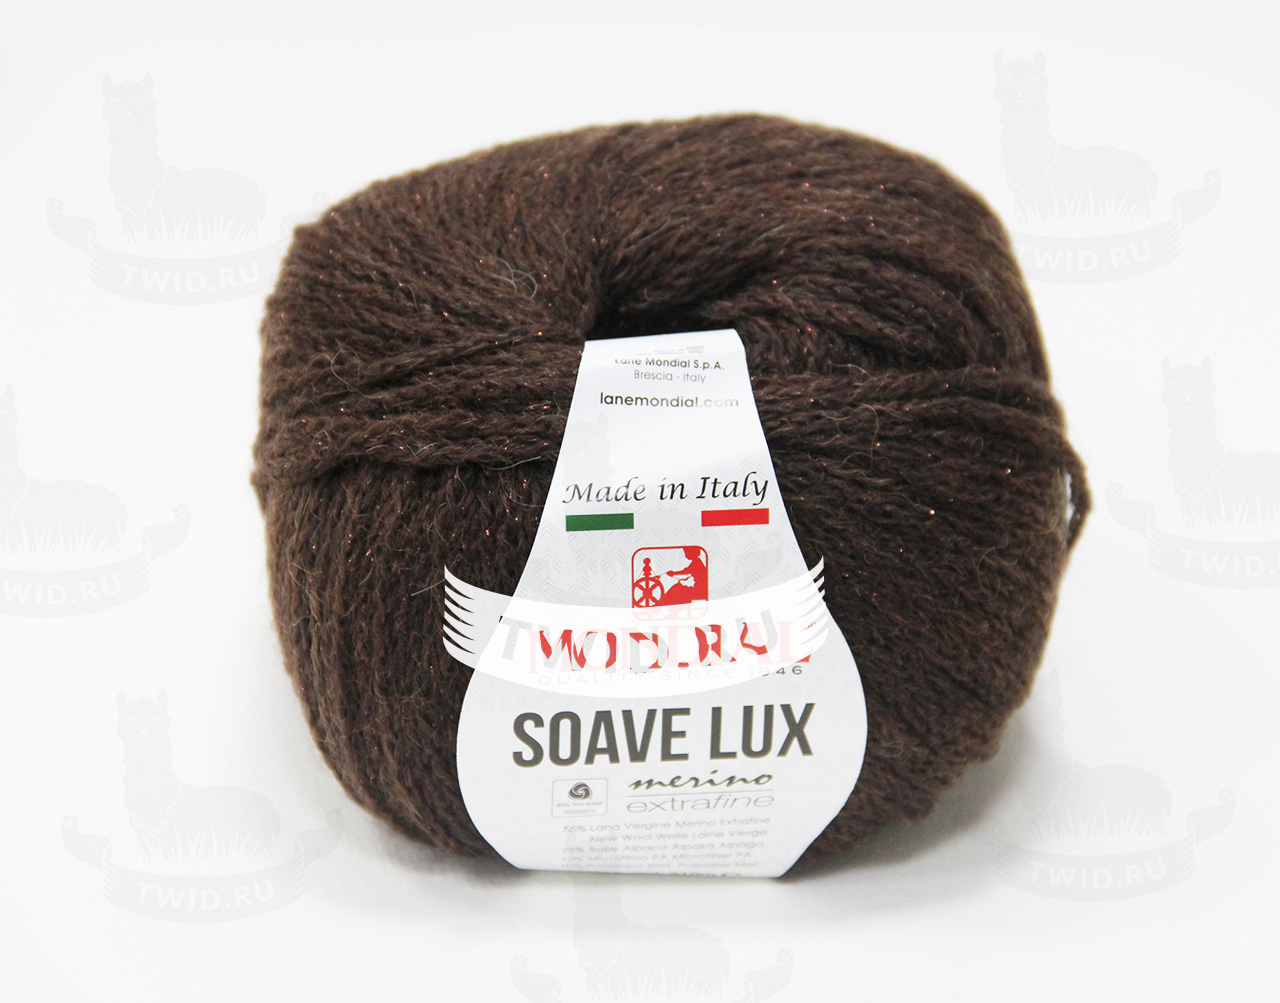 Soave Lux 786